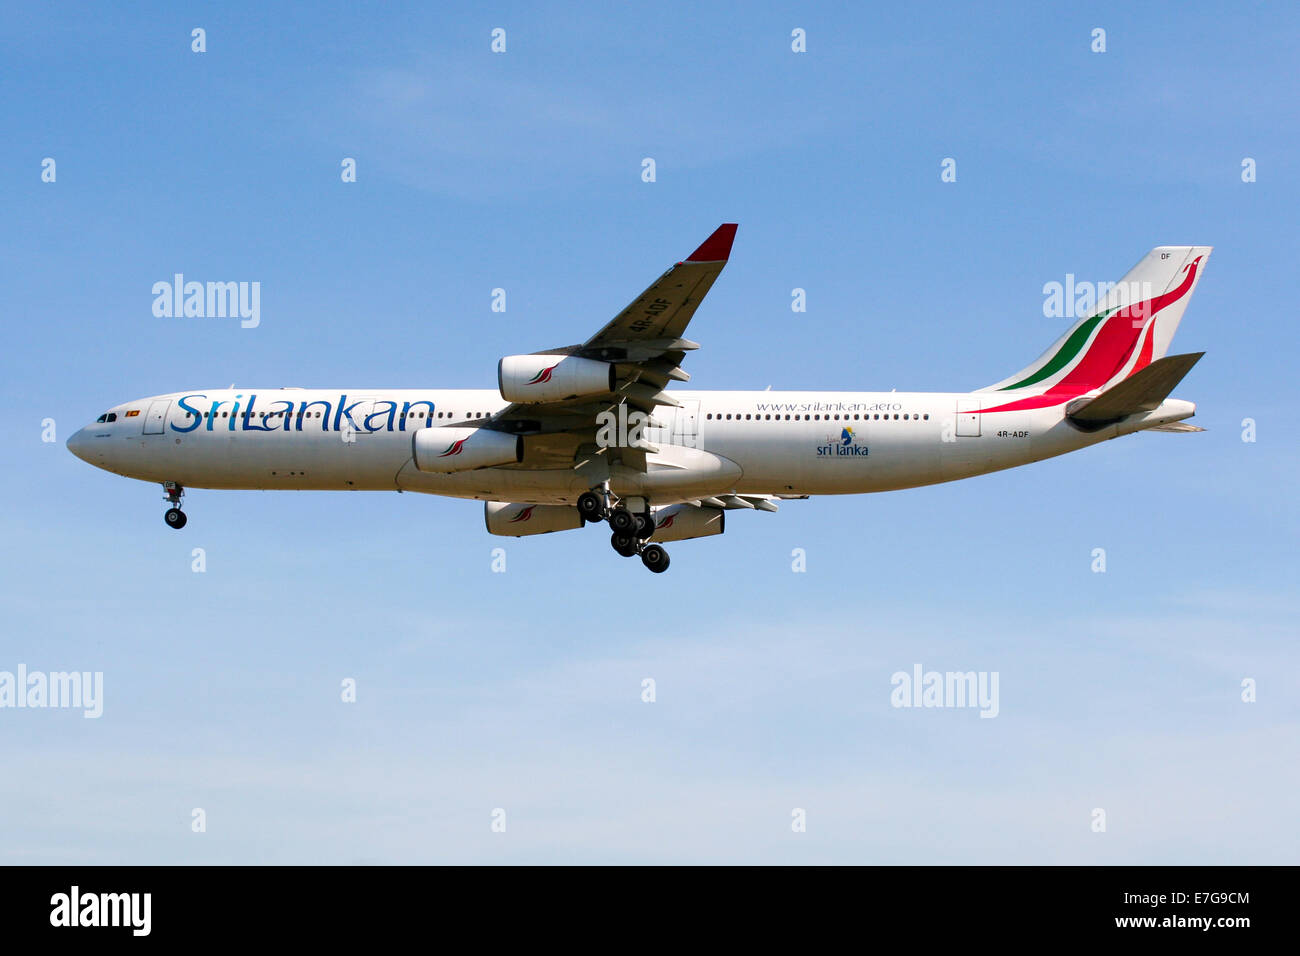 Sri Lankan Airlines Airbus A340-300 approaches runway 27L at London Heathrow airport. Stock Photo